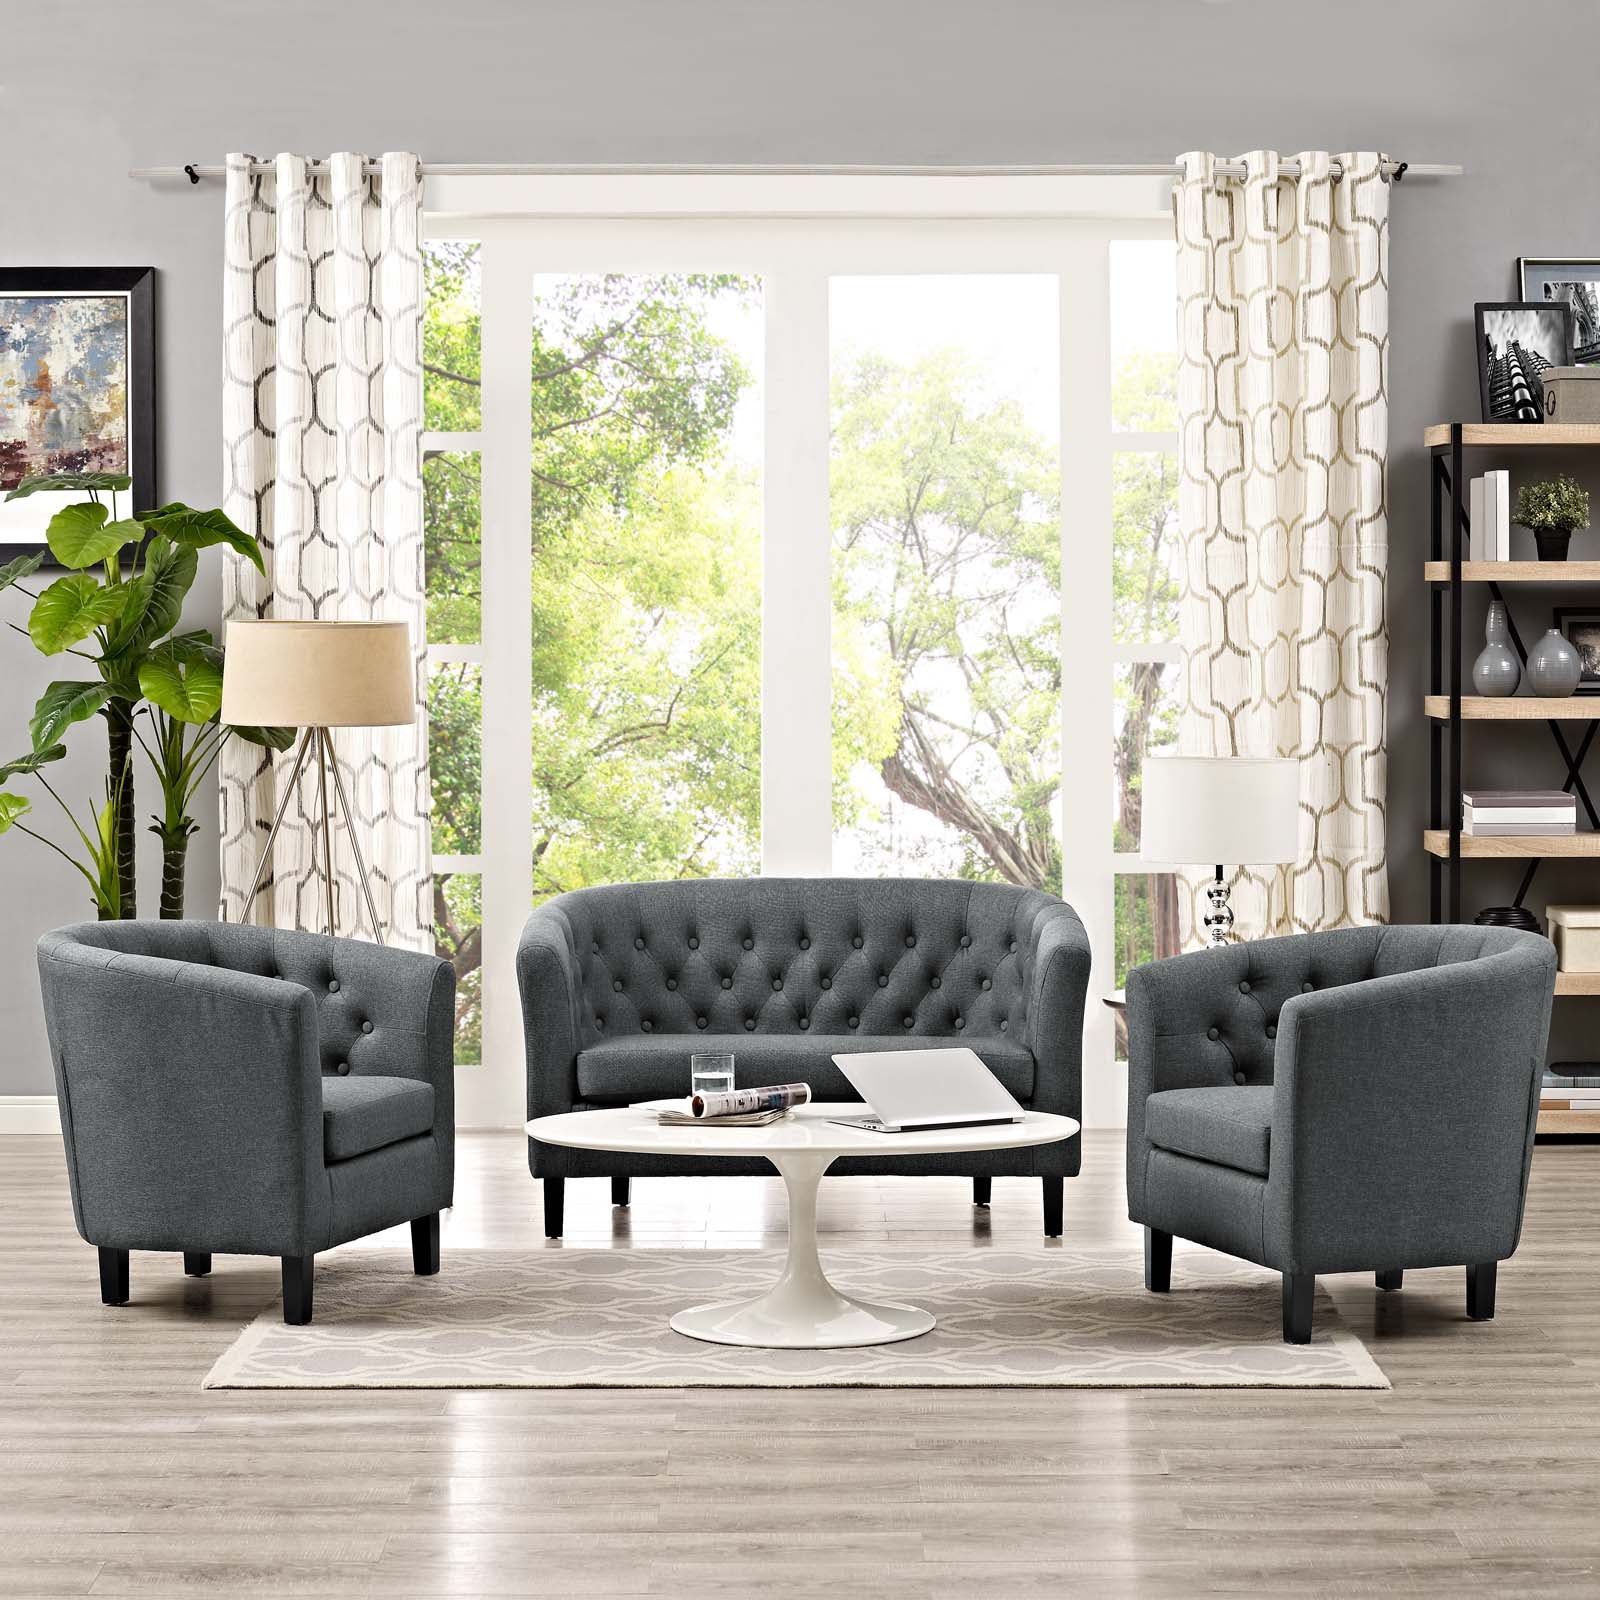 Modway Living Room Sets - Prospect 3 Piece Upholstered Fabric Loveseat and Armchair Set Gray